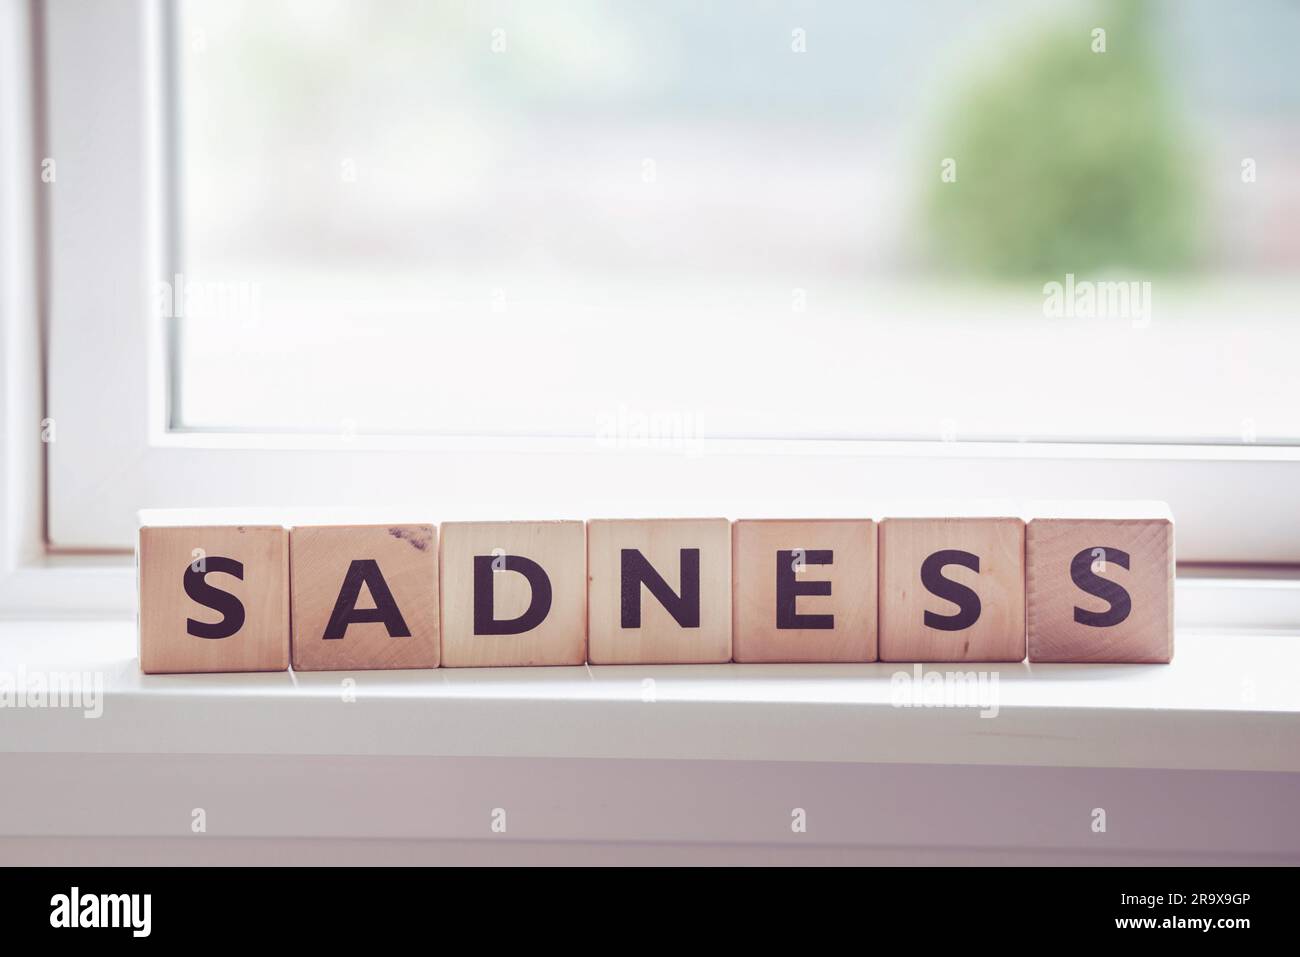 Sadness word made of wood in a bright window Stock Photo